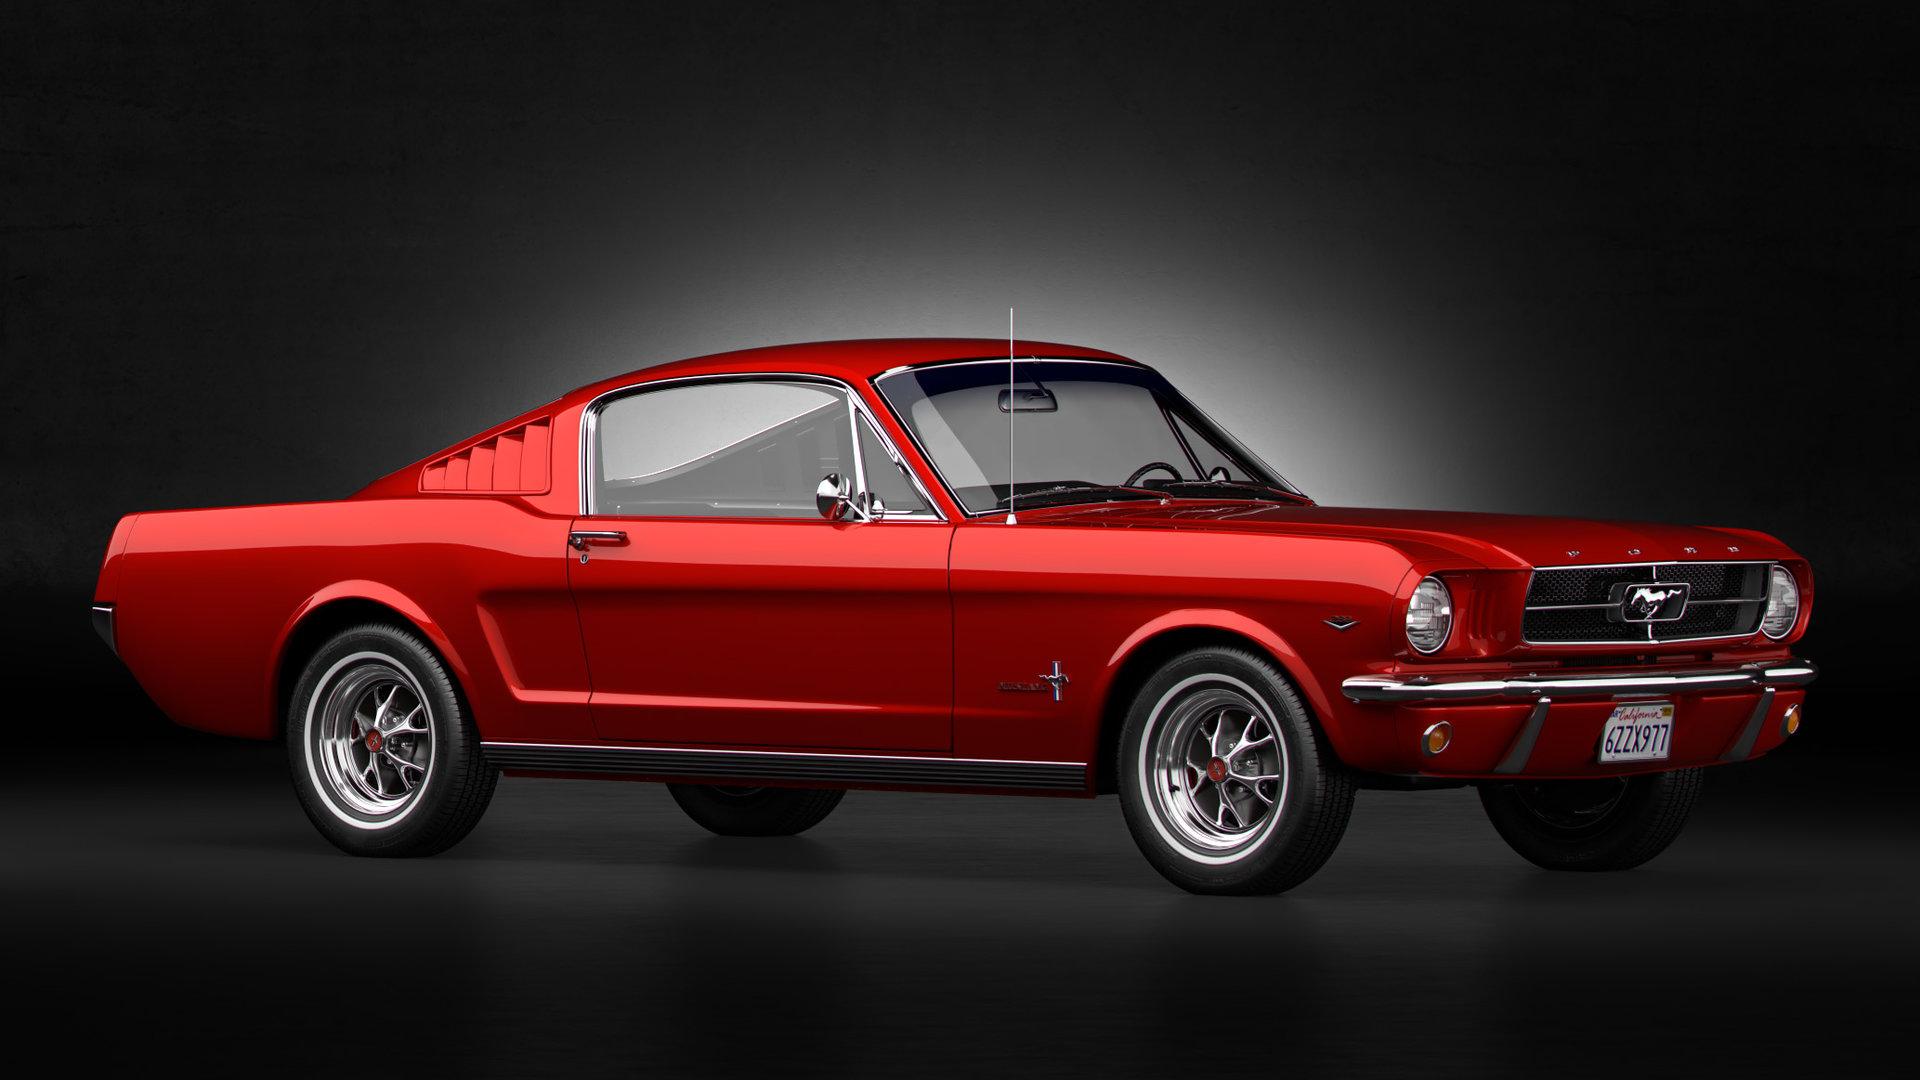 1965 Ford Mustang Fastback, Deffet Thomas